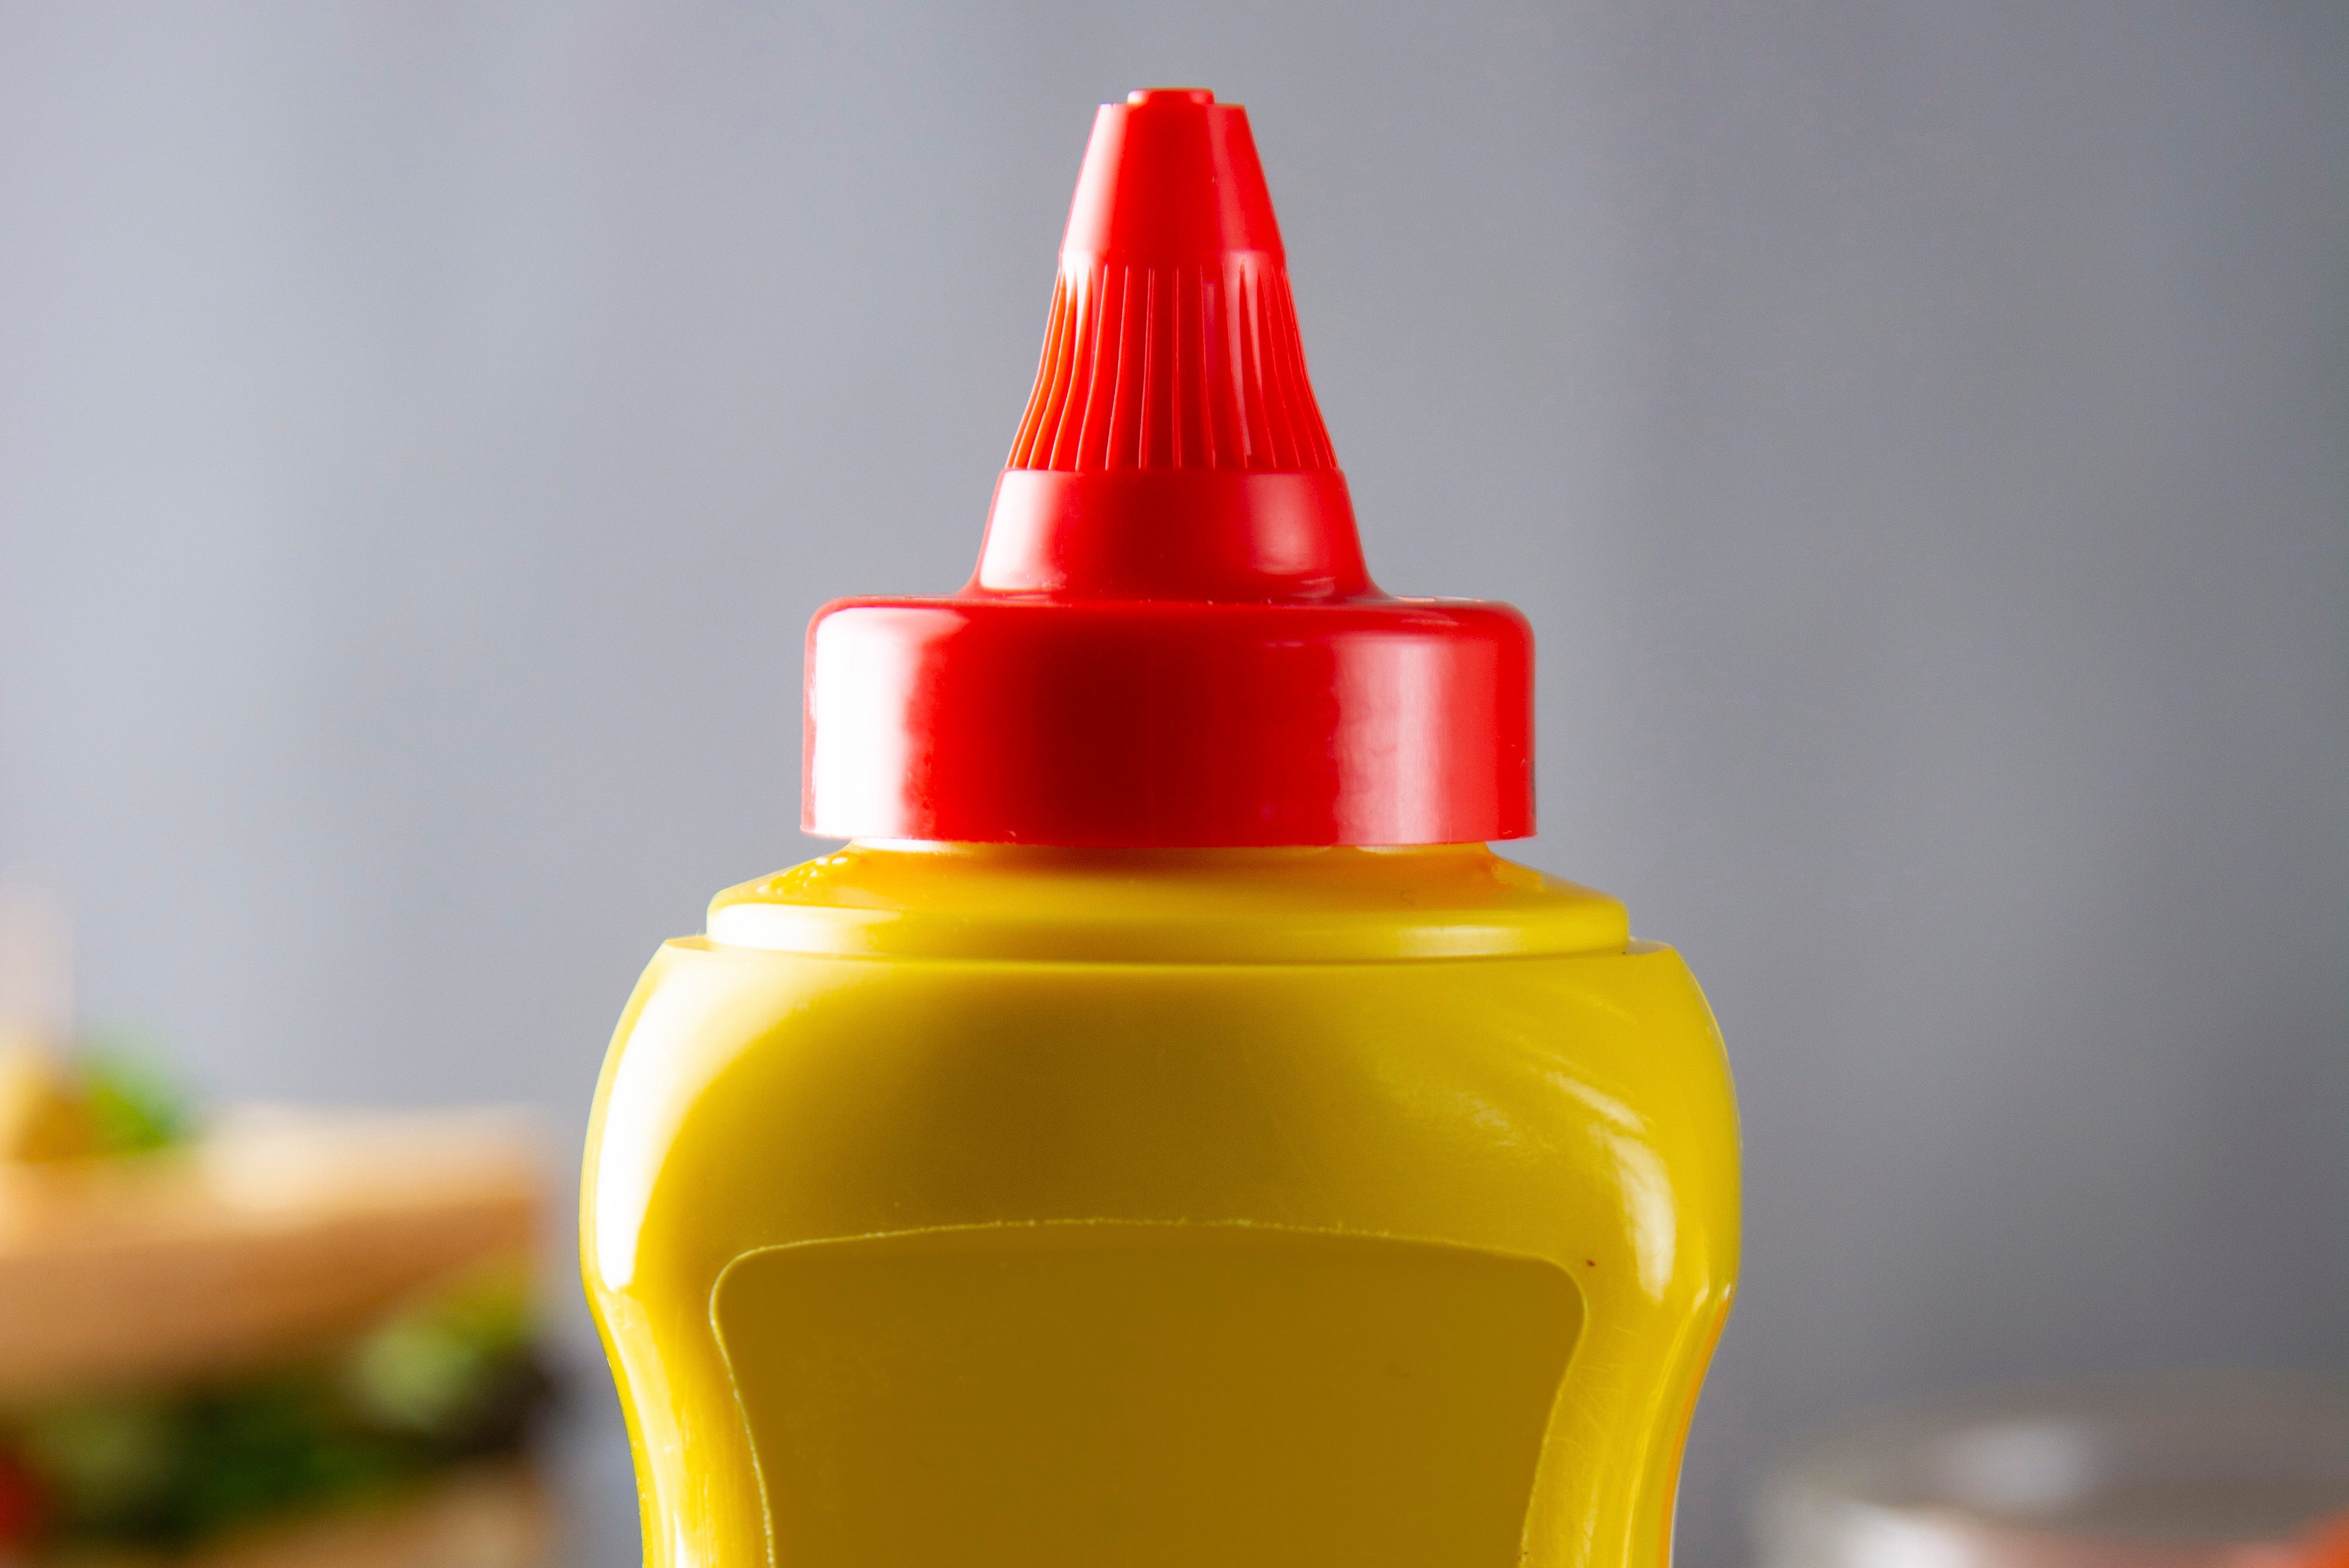 Yellow mustard squeeze bottle container with no label. Breakfast sandwich on background. Food product.